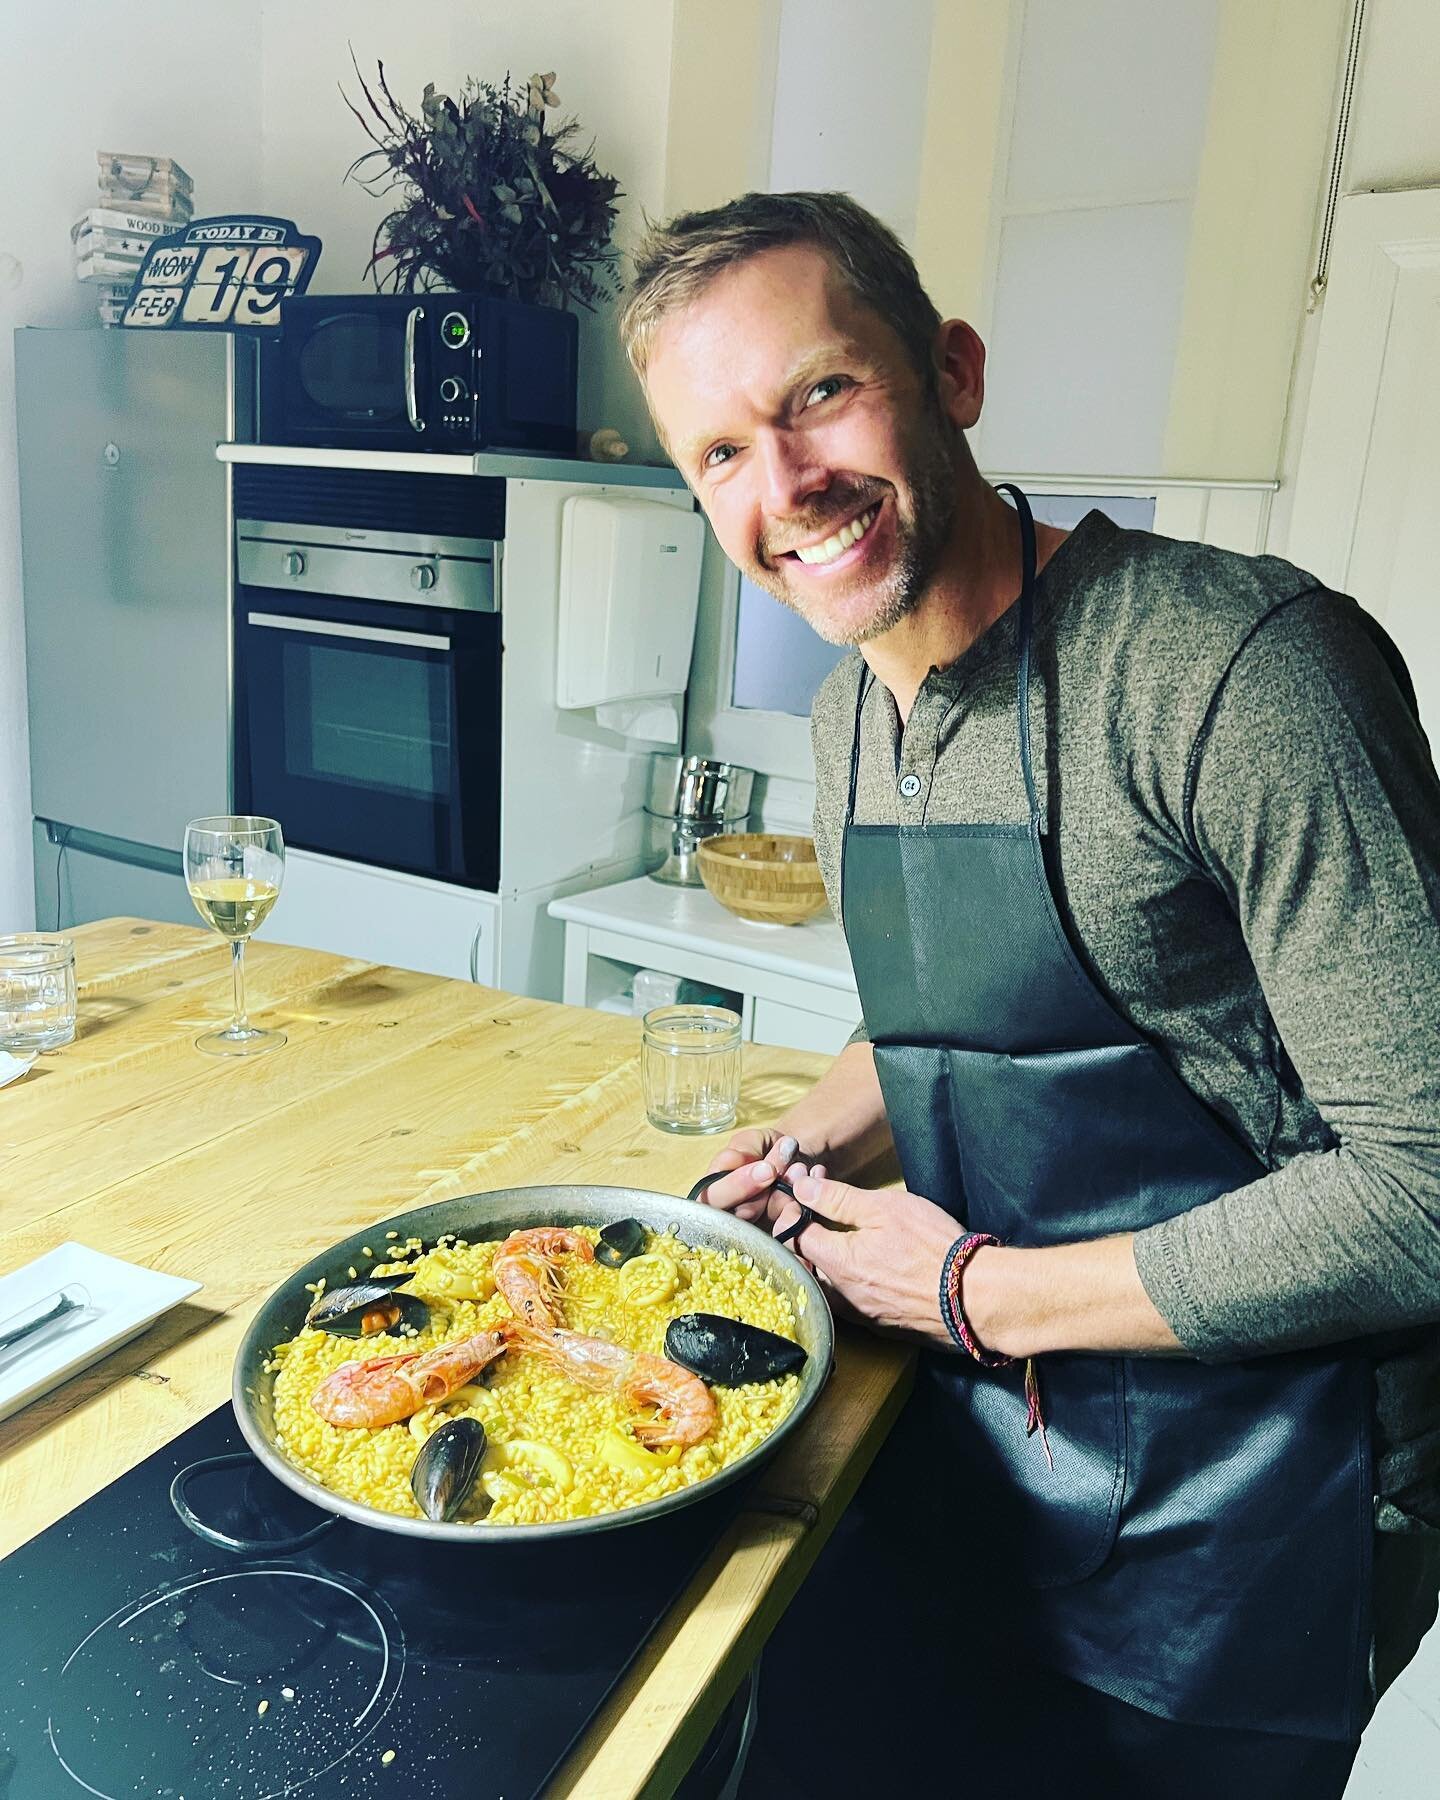 The cooking class and market tour was splendid. I learnt how to cook ( and tried) a basic seafood paella for the first time ever with a bunch of New Yorkers of all people . Yum !!